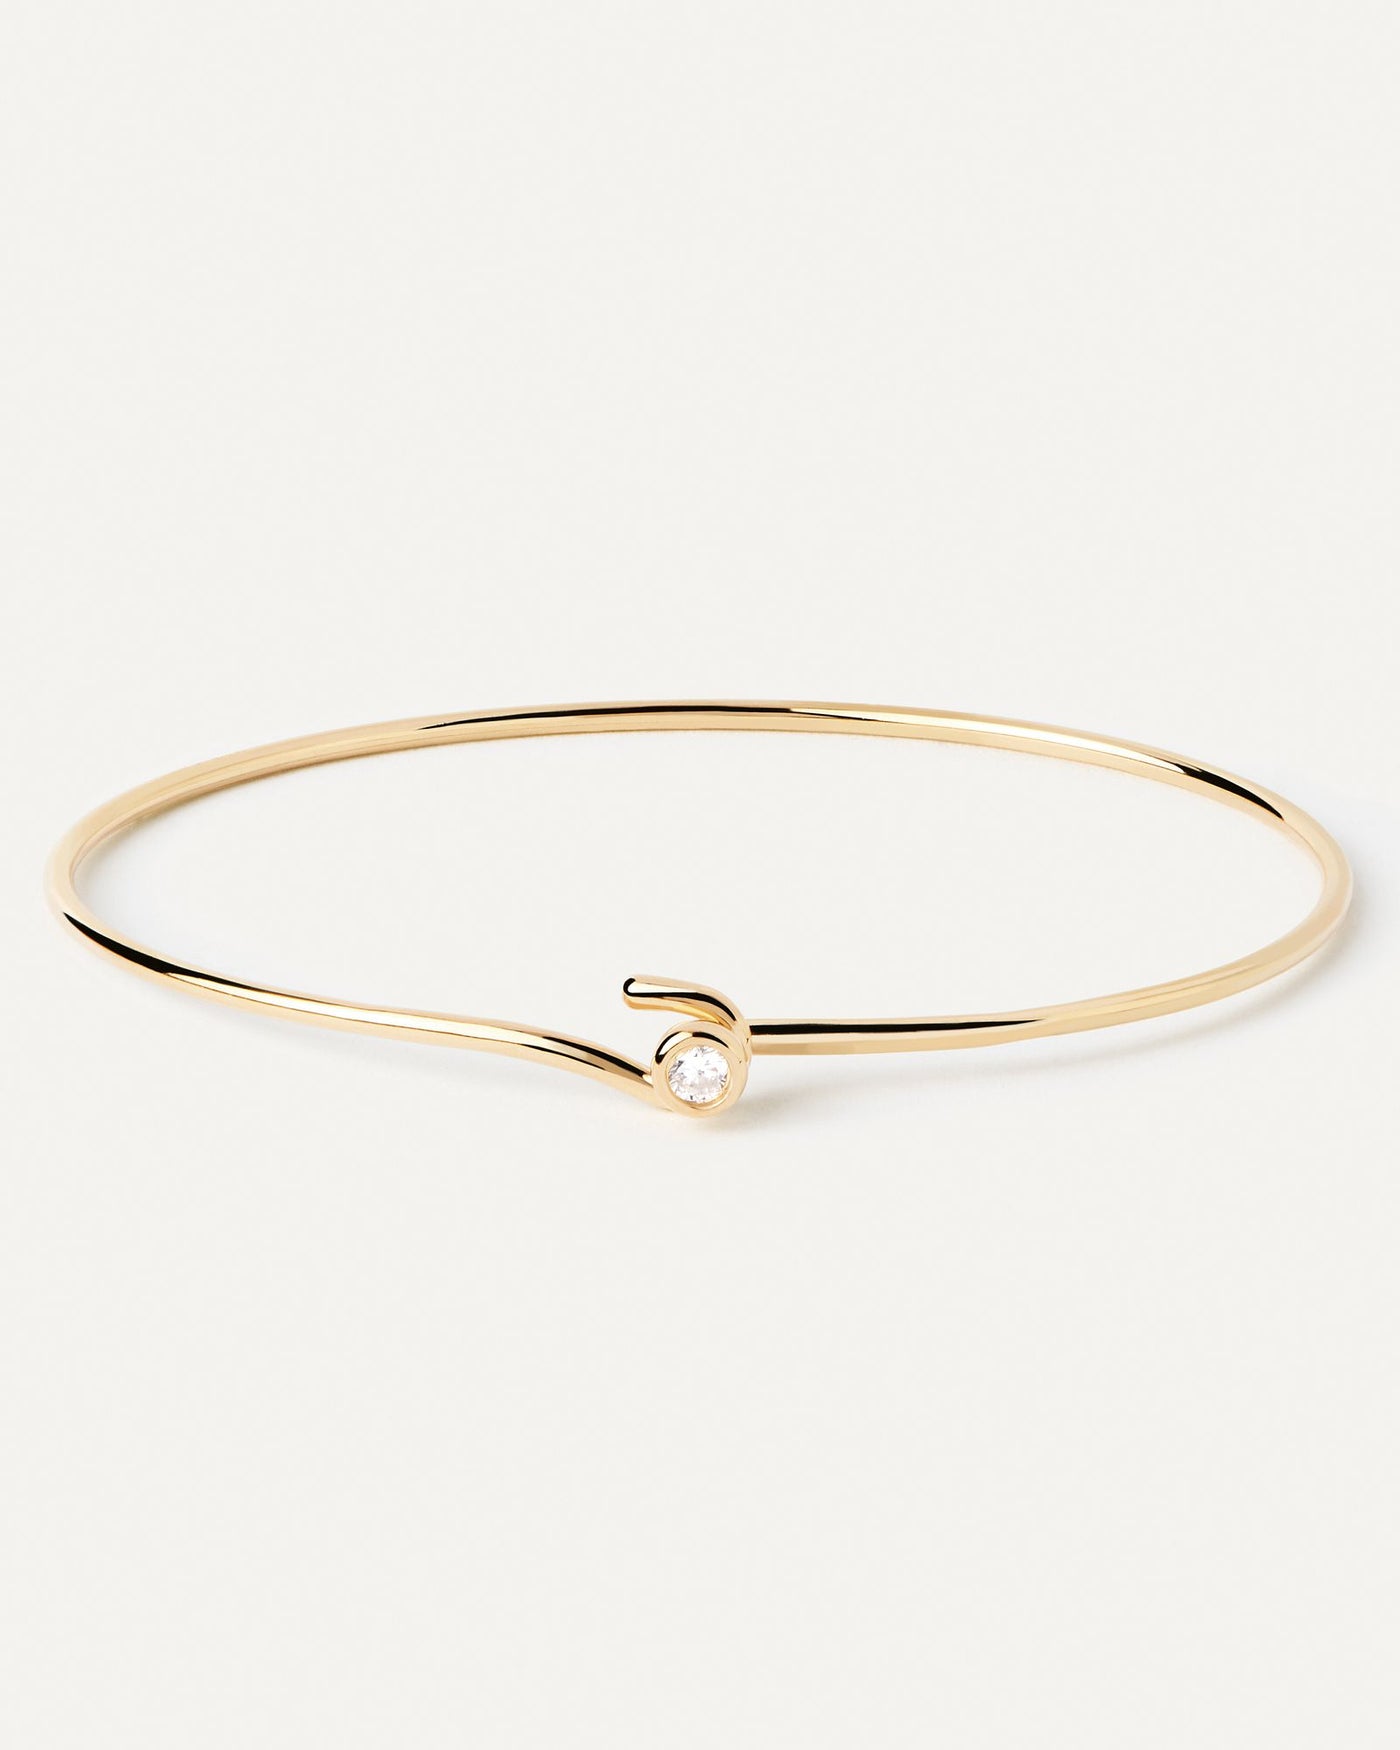 2024 Selection | Siena Bangle. Gold-plated slim hook bangle topped with white zirconia. Get the latest arrival from PDPAOLA. Place your order safely and get this Best Seller. Free Shipping.